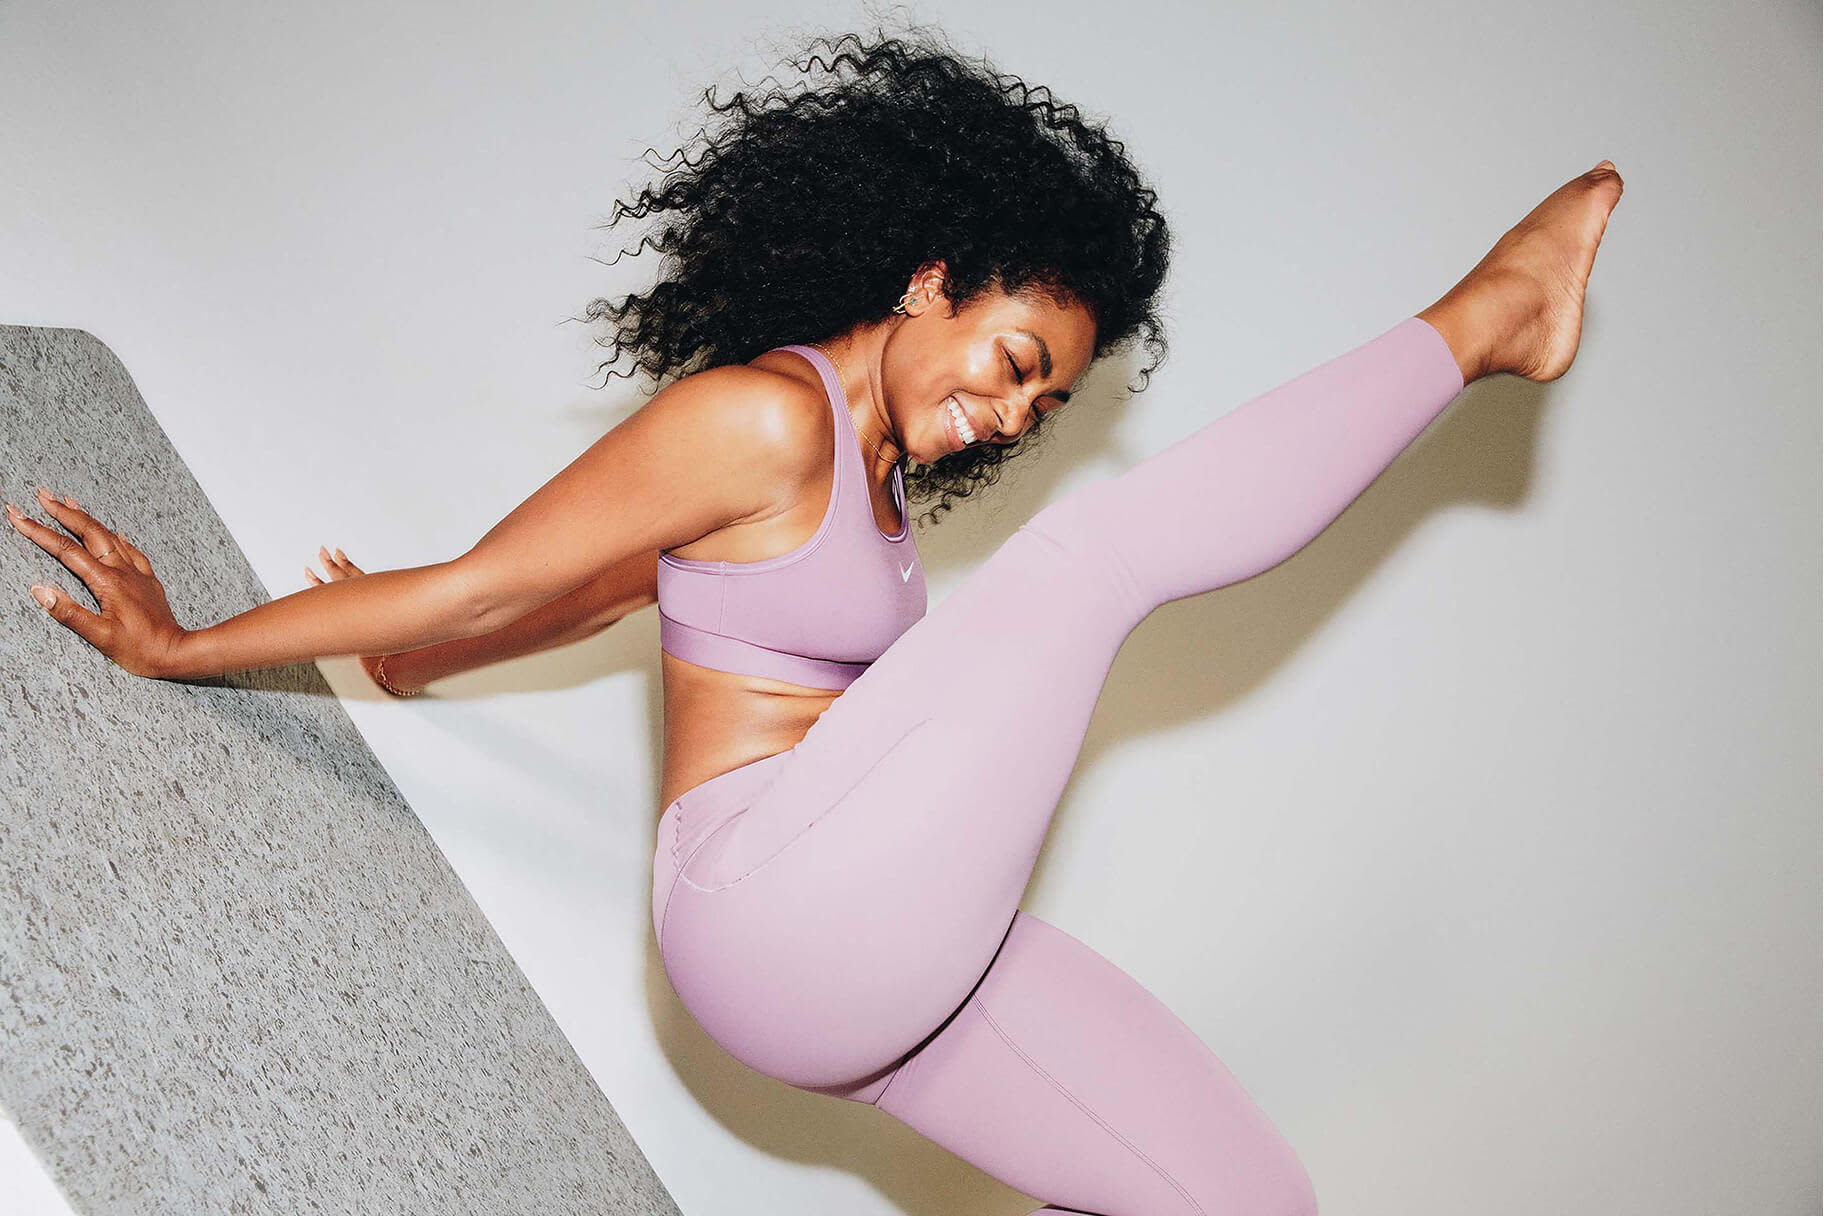 The Best Nike leggings for support and compression